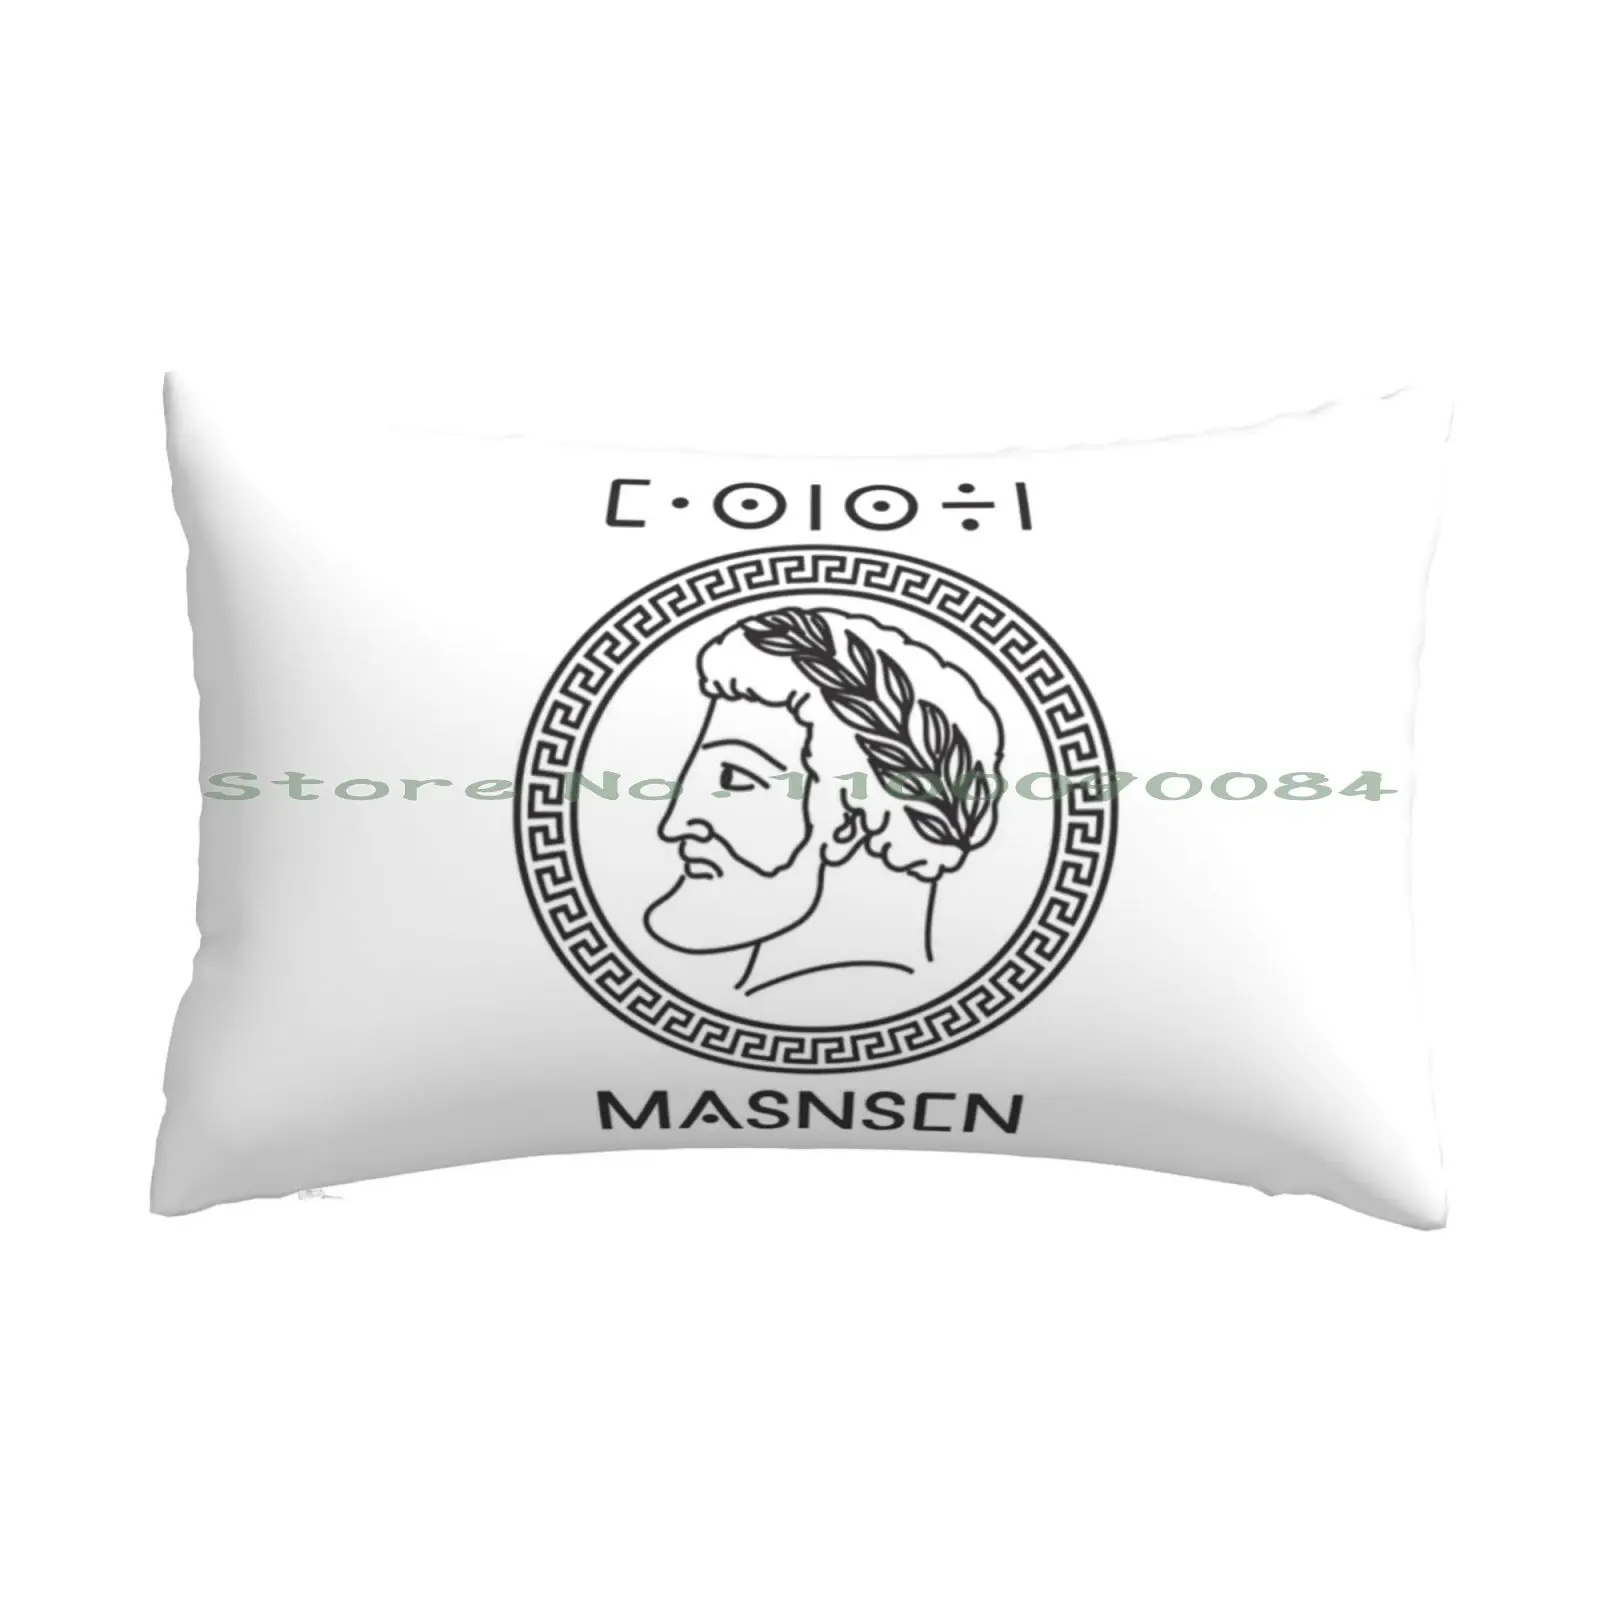 Massinissa Berber King Pillow Case 20x30 50*75 Sofa Bedroom Whisky Whiskey Wine Beer Busch Light Yuengling Casamigos Tequila